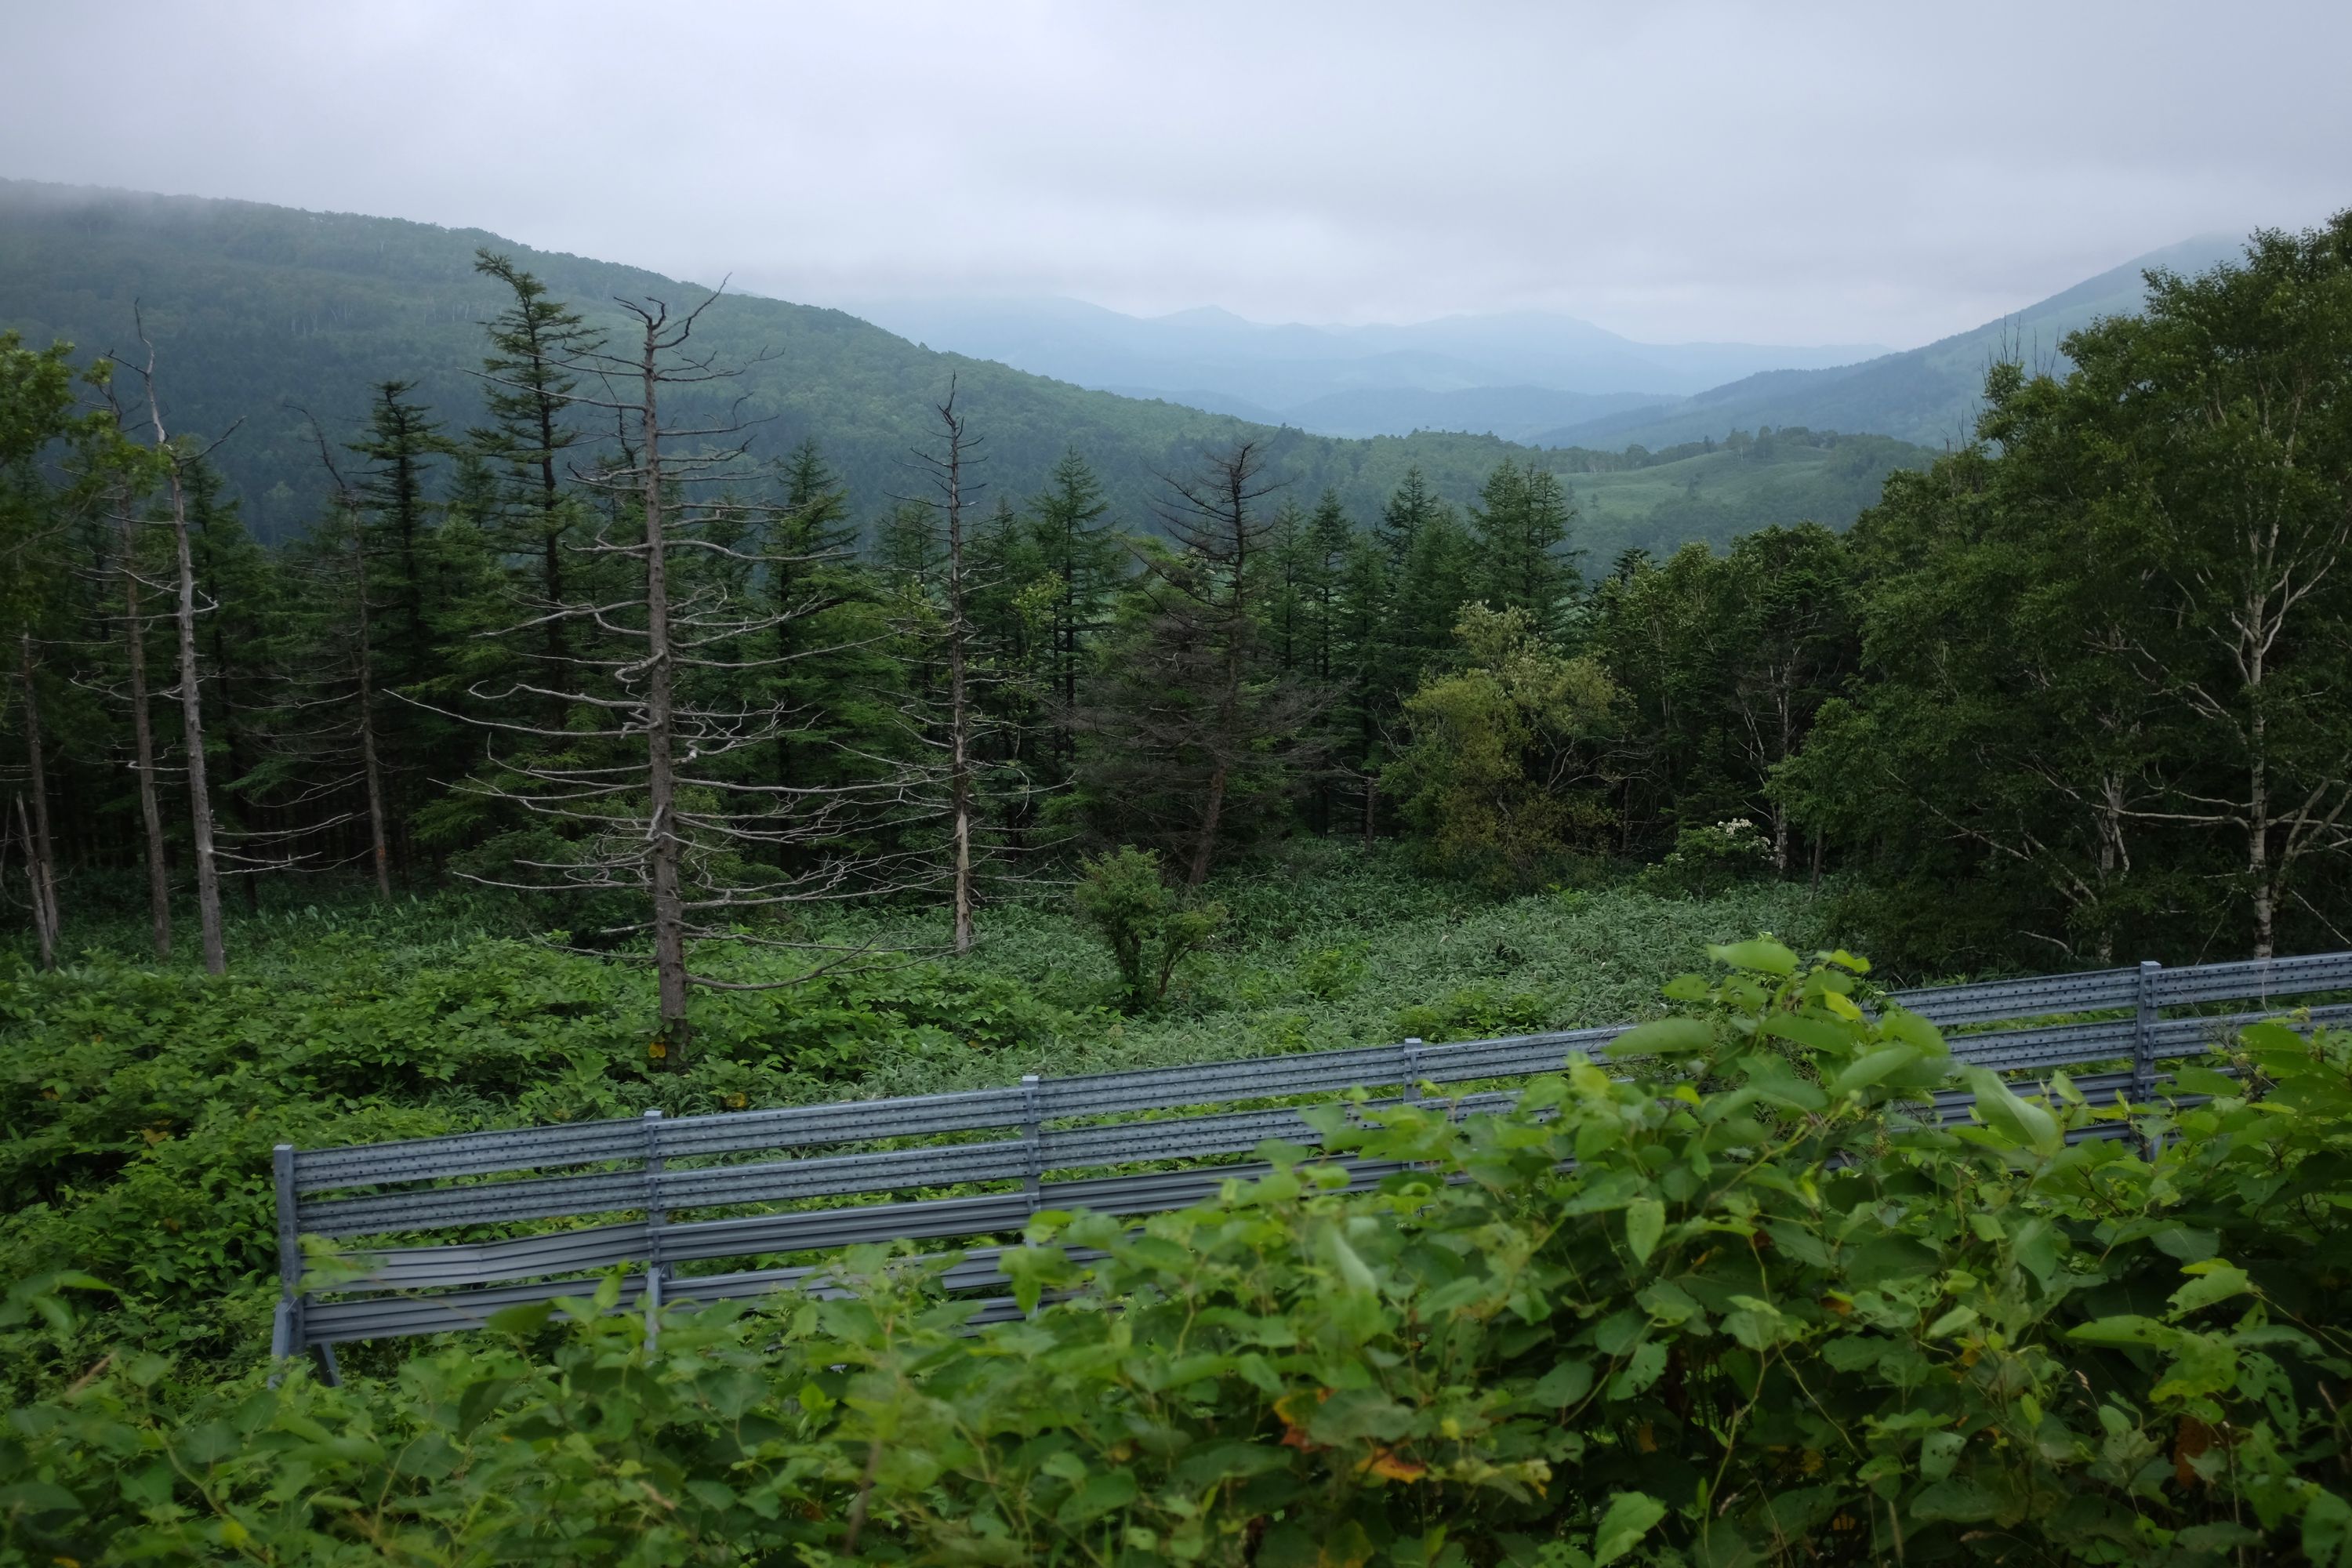 Panorama of a wooded, hilly landscape under grey clouds.